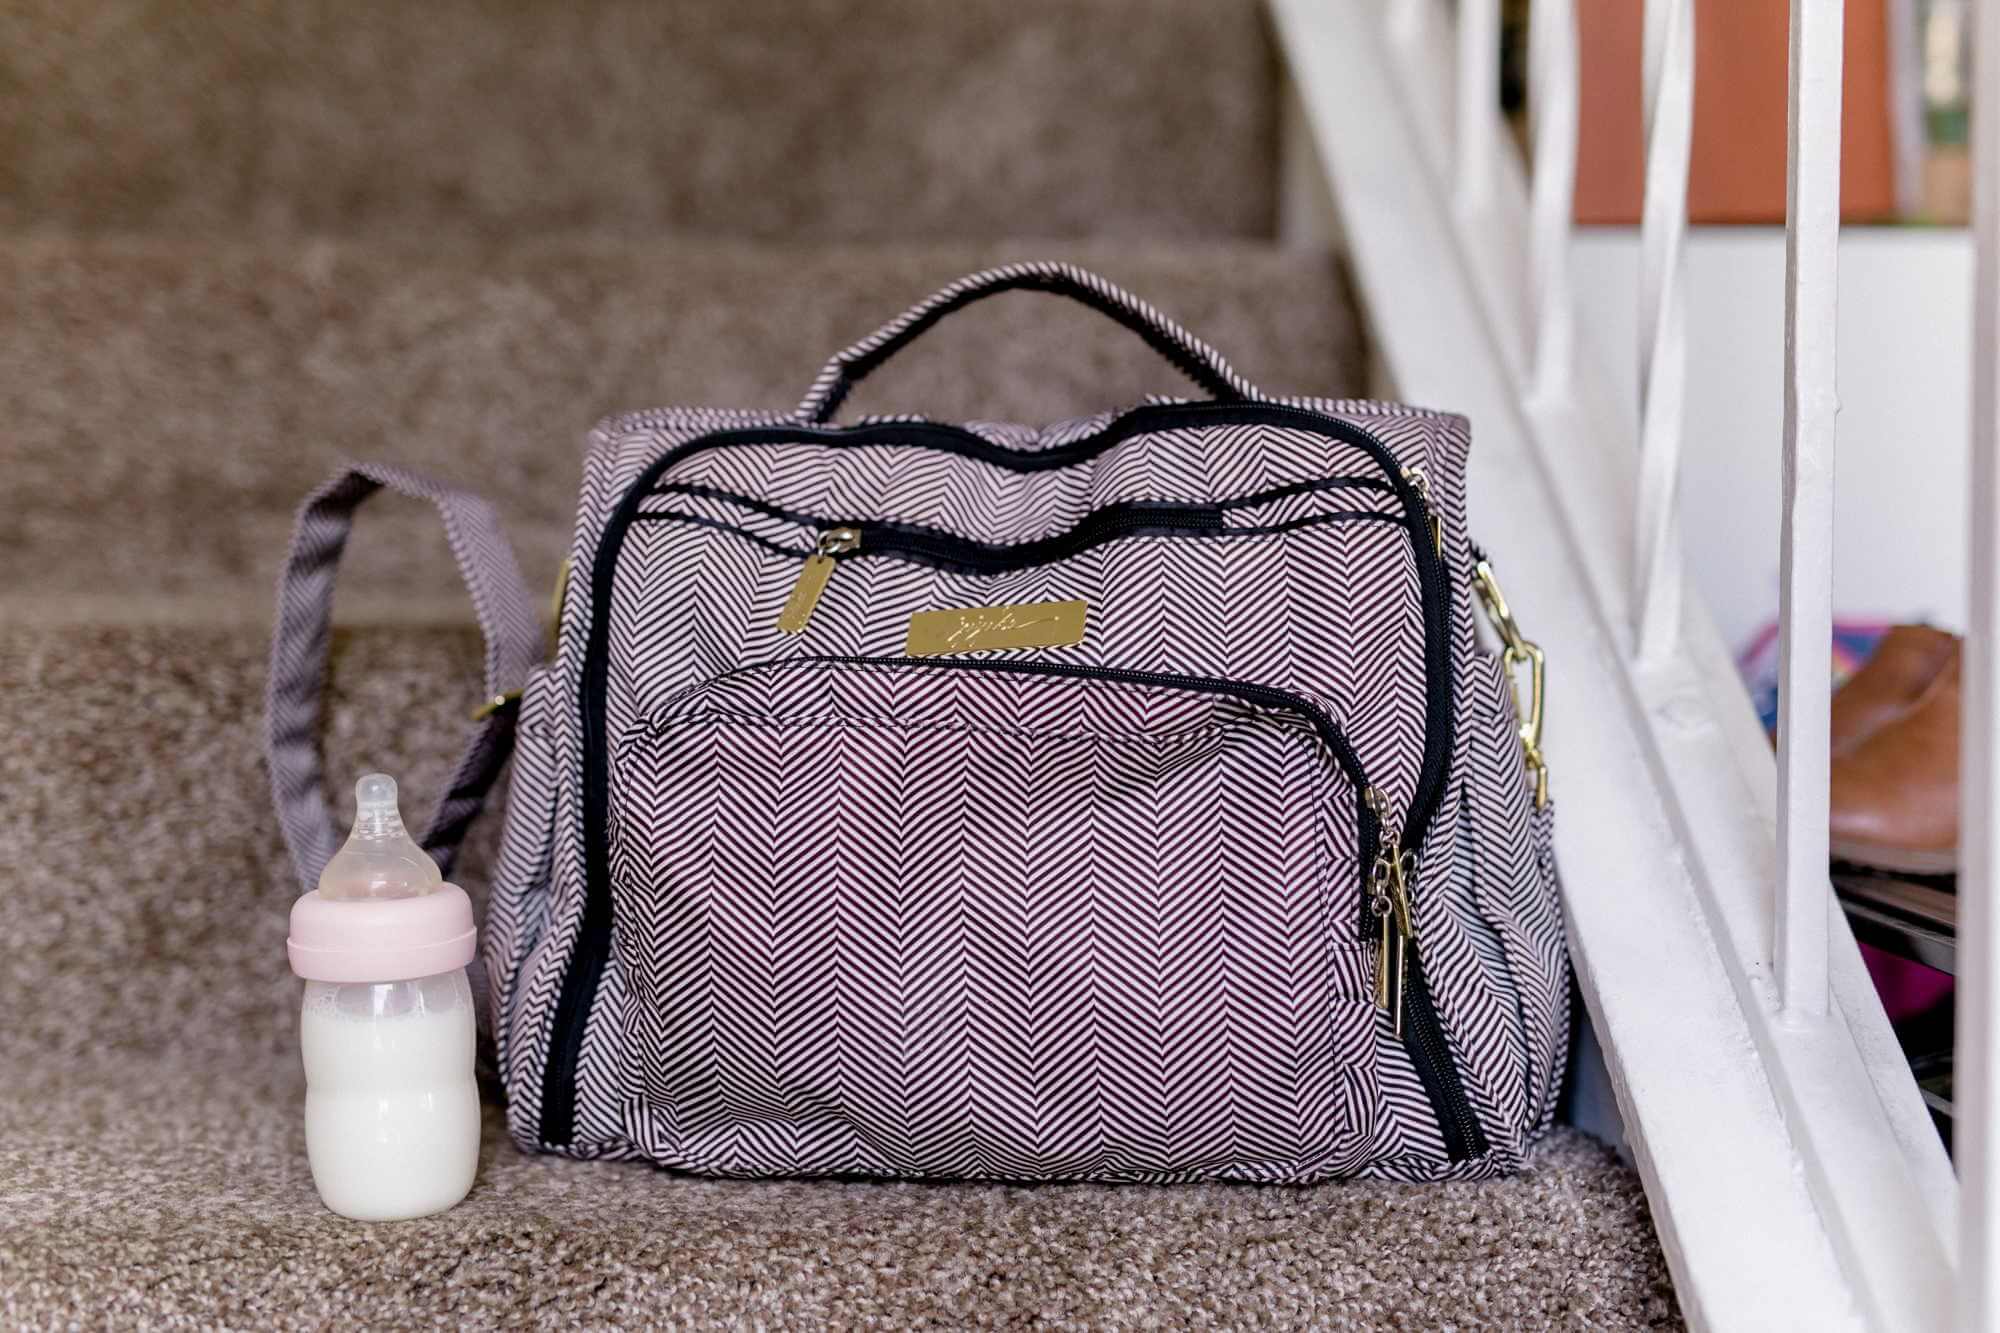 The Unstoppable Diaper Bag